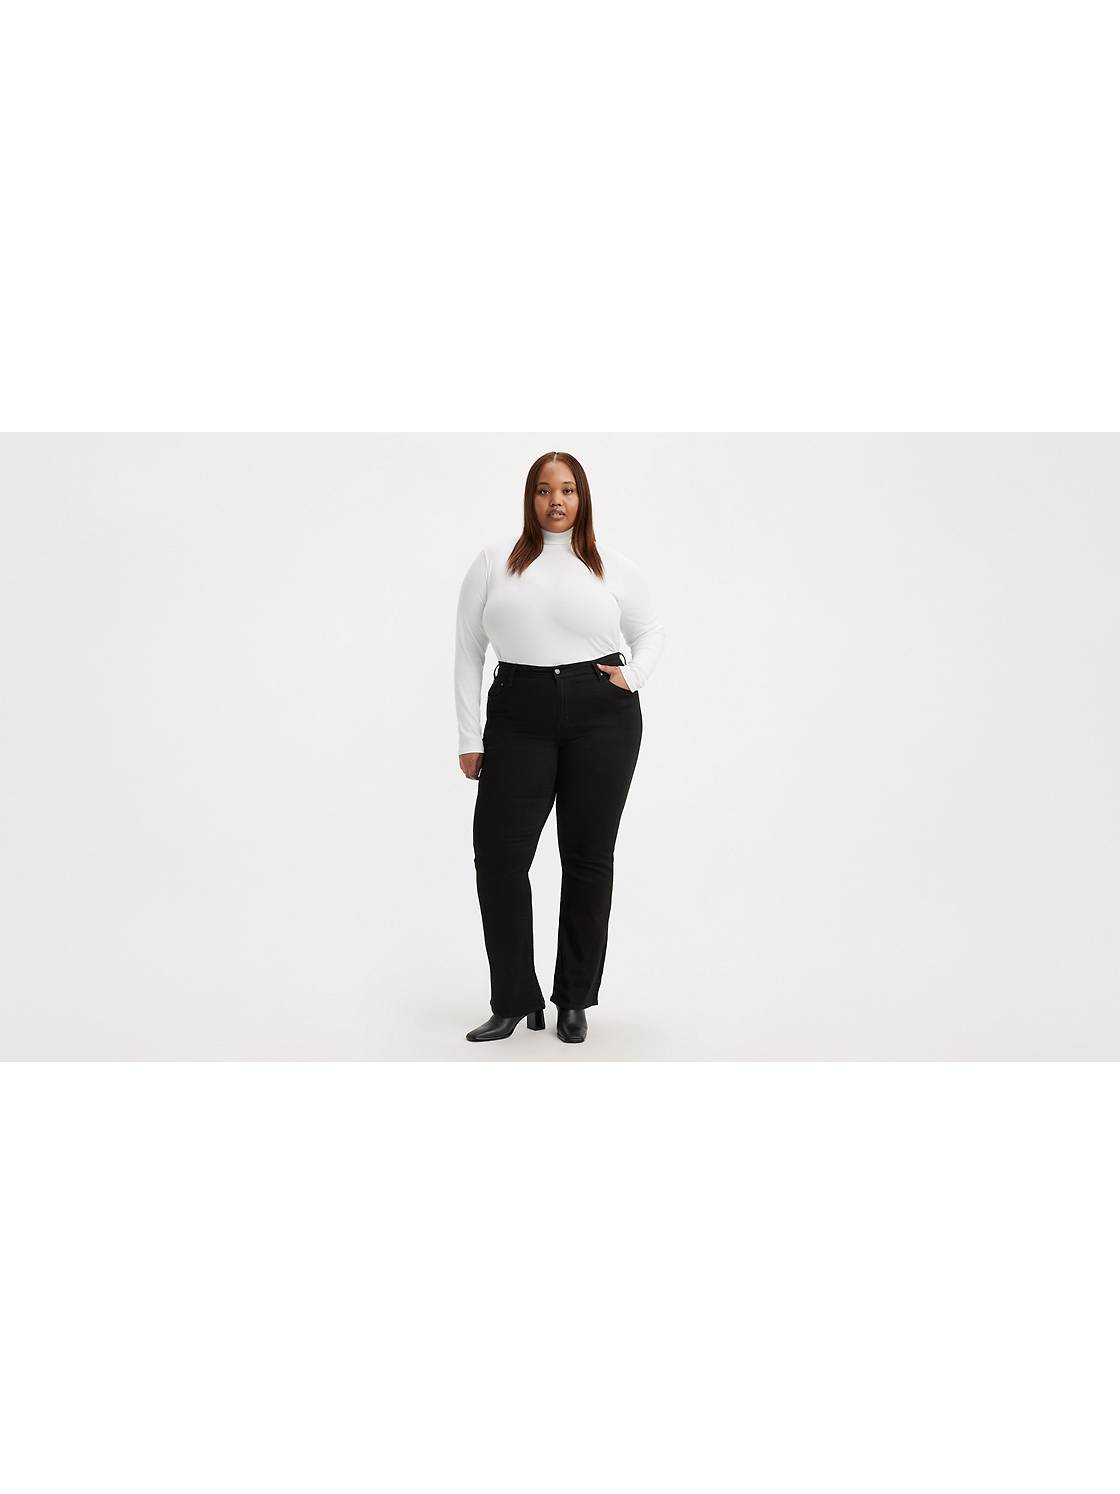 Affordable Trendy Plus Size Clothing 2019